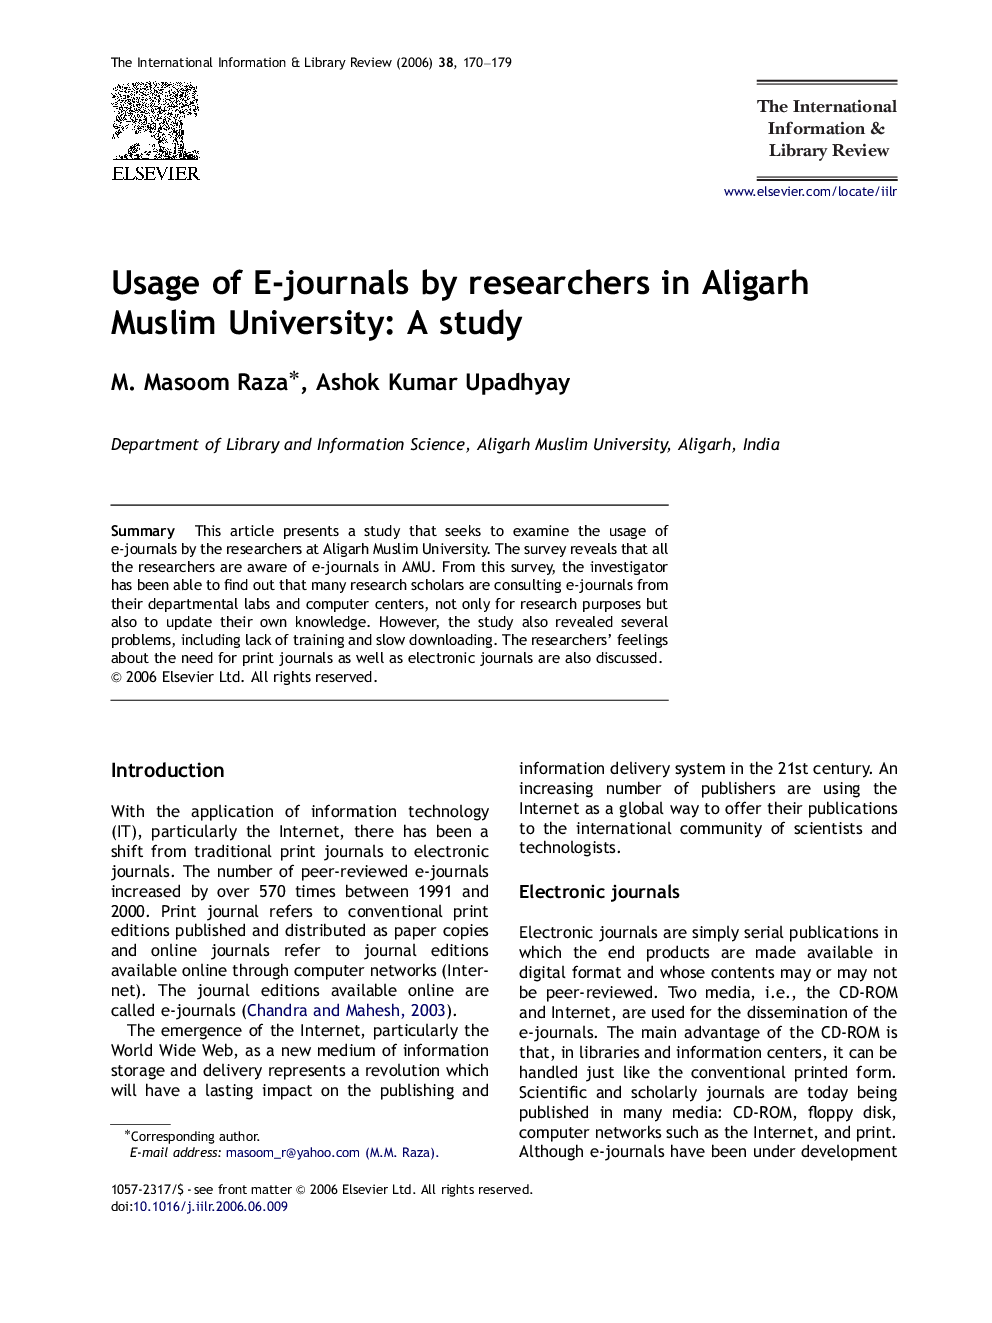 Usage of E-journals by researchers in Aligarh Muslim University: A study